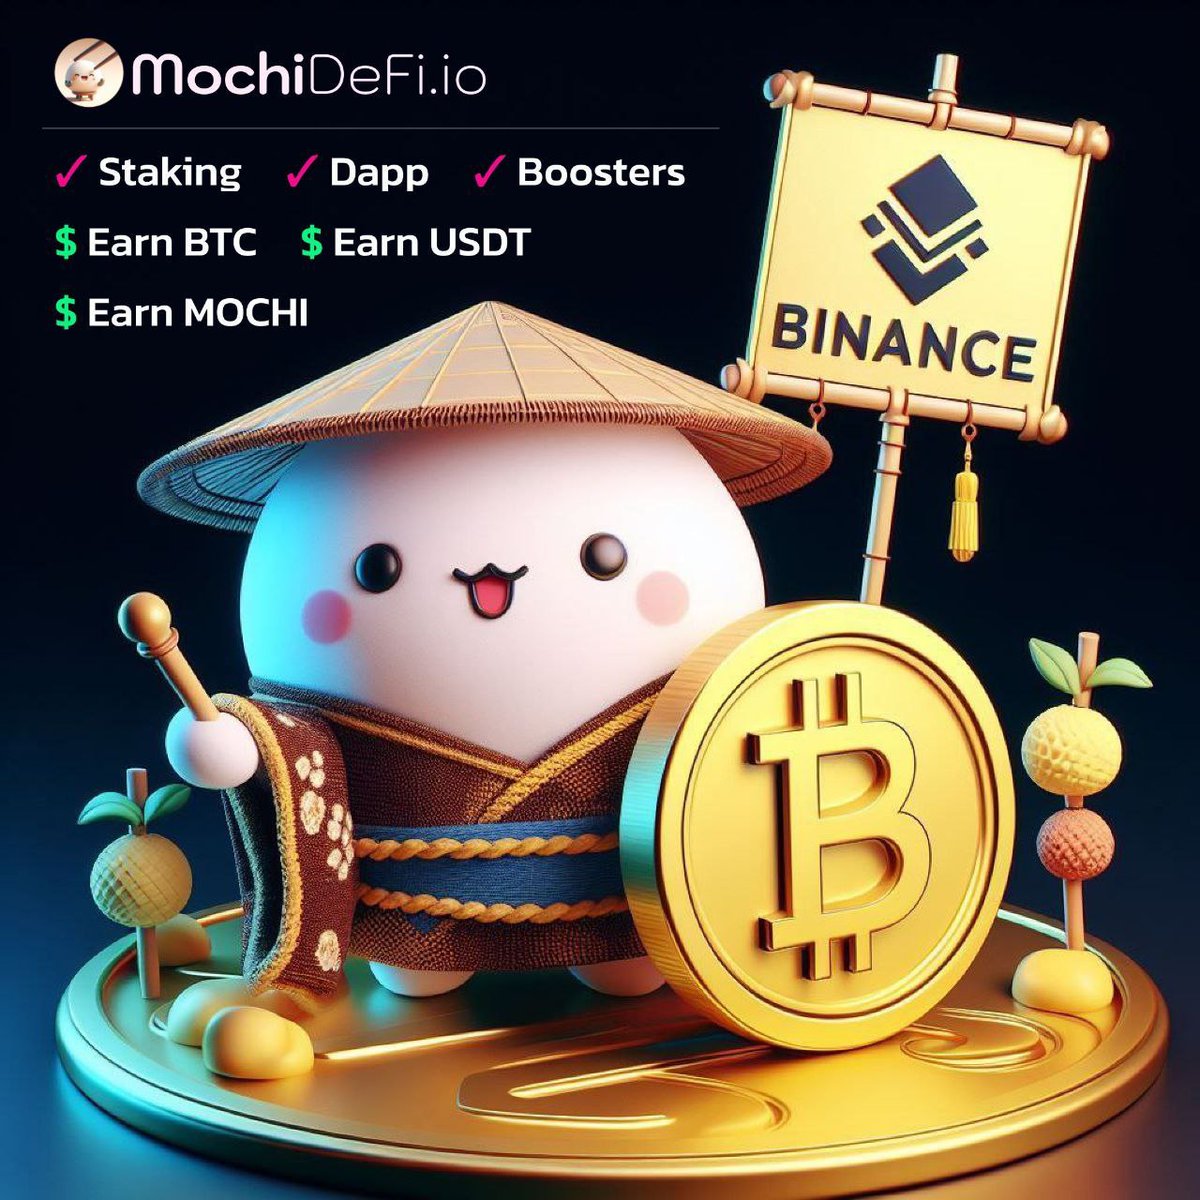 Indulge in the most delicious memecoin on #BNBChain with @Mochi_DeFi! 🍡

Mochi DeFi offers diverse utilities, exclusive NFTs, and staking to boost $MOCHI🚀

Get ready for its listing on @BiconomyCom on May 16th!📈

Explore more: mochidefi.io

#Sponsored #MOCHI